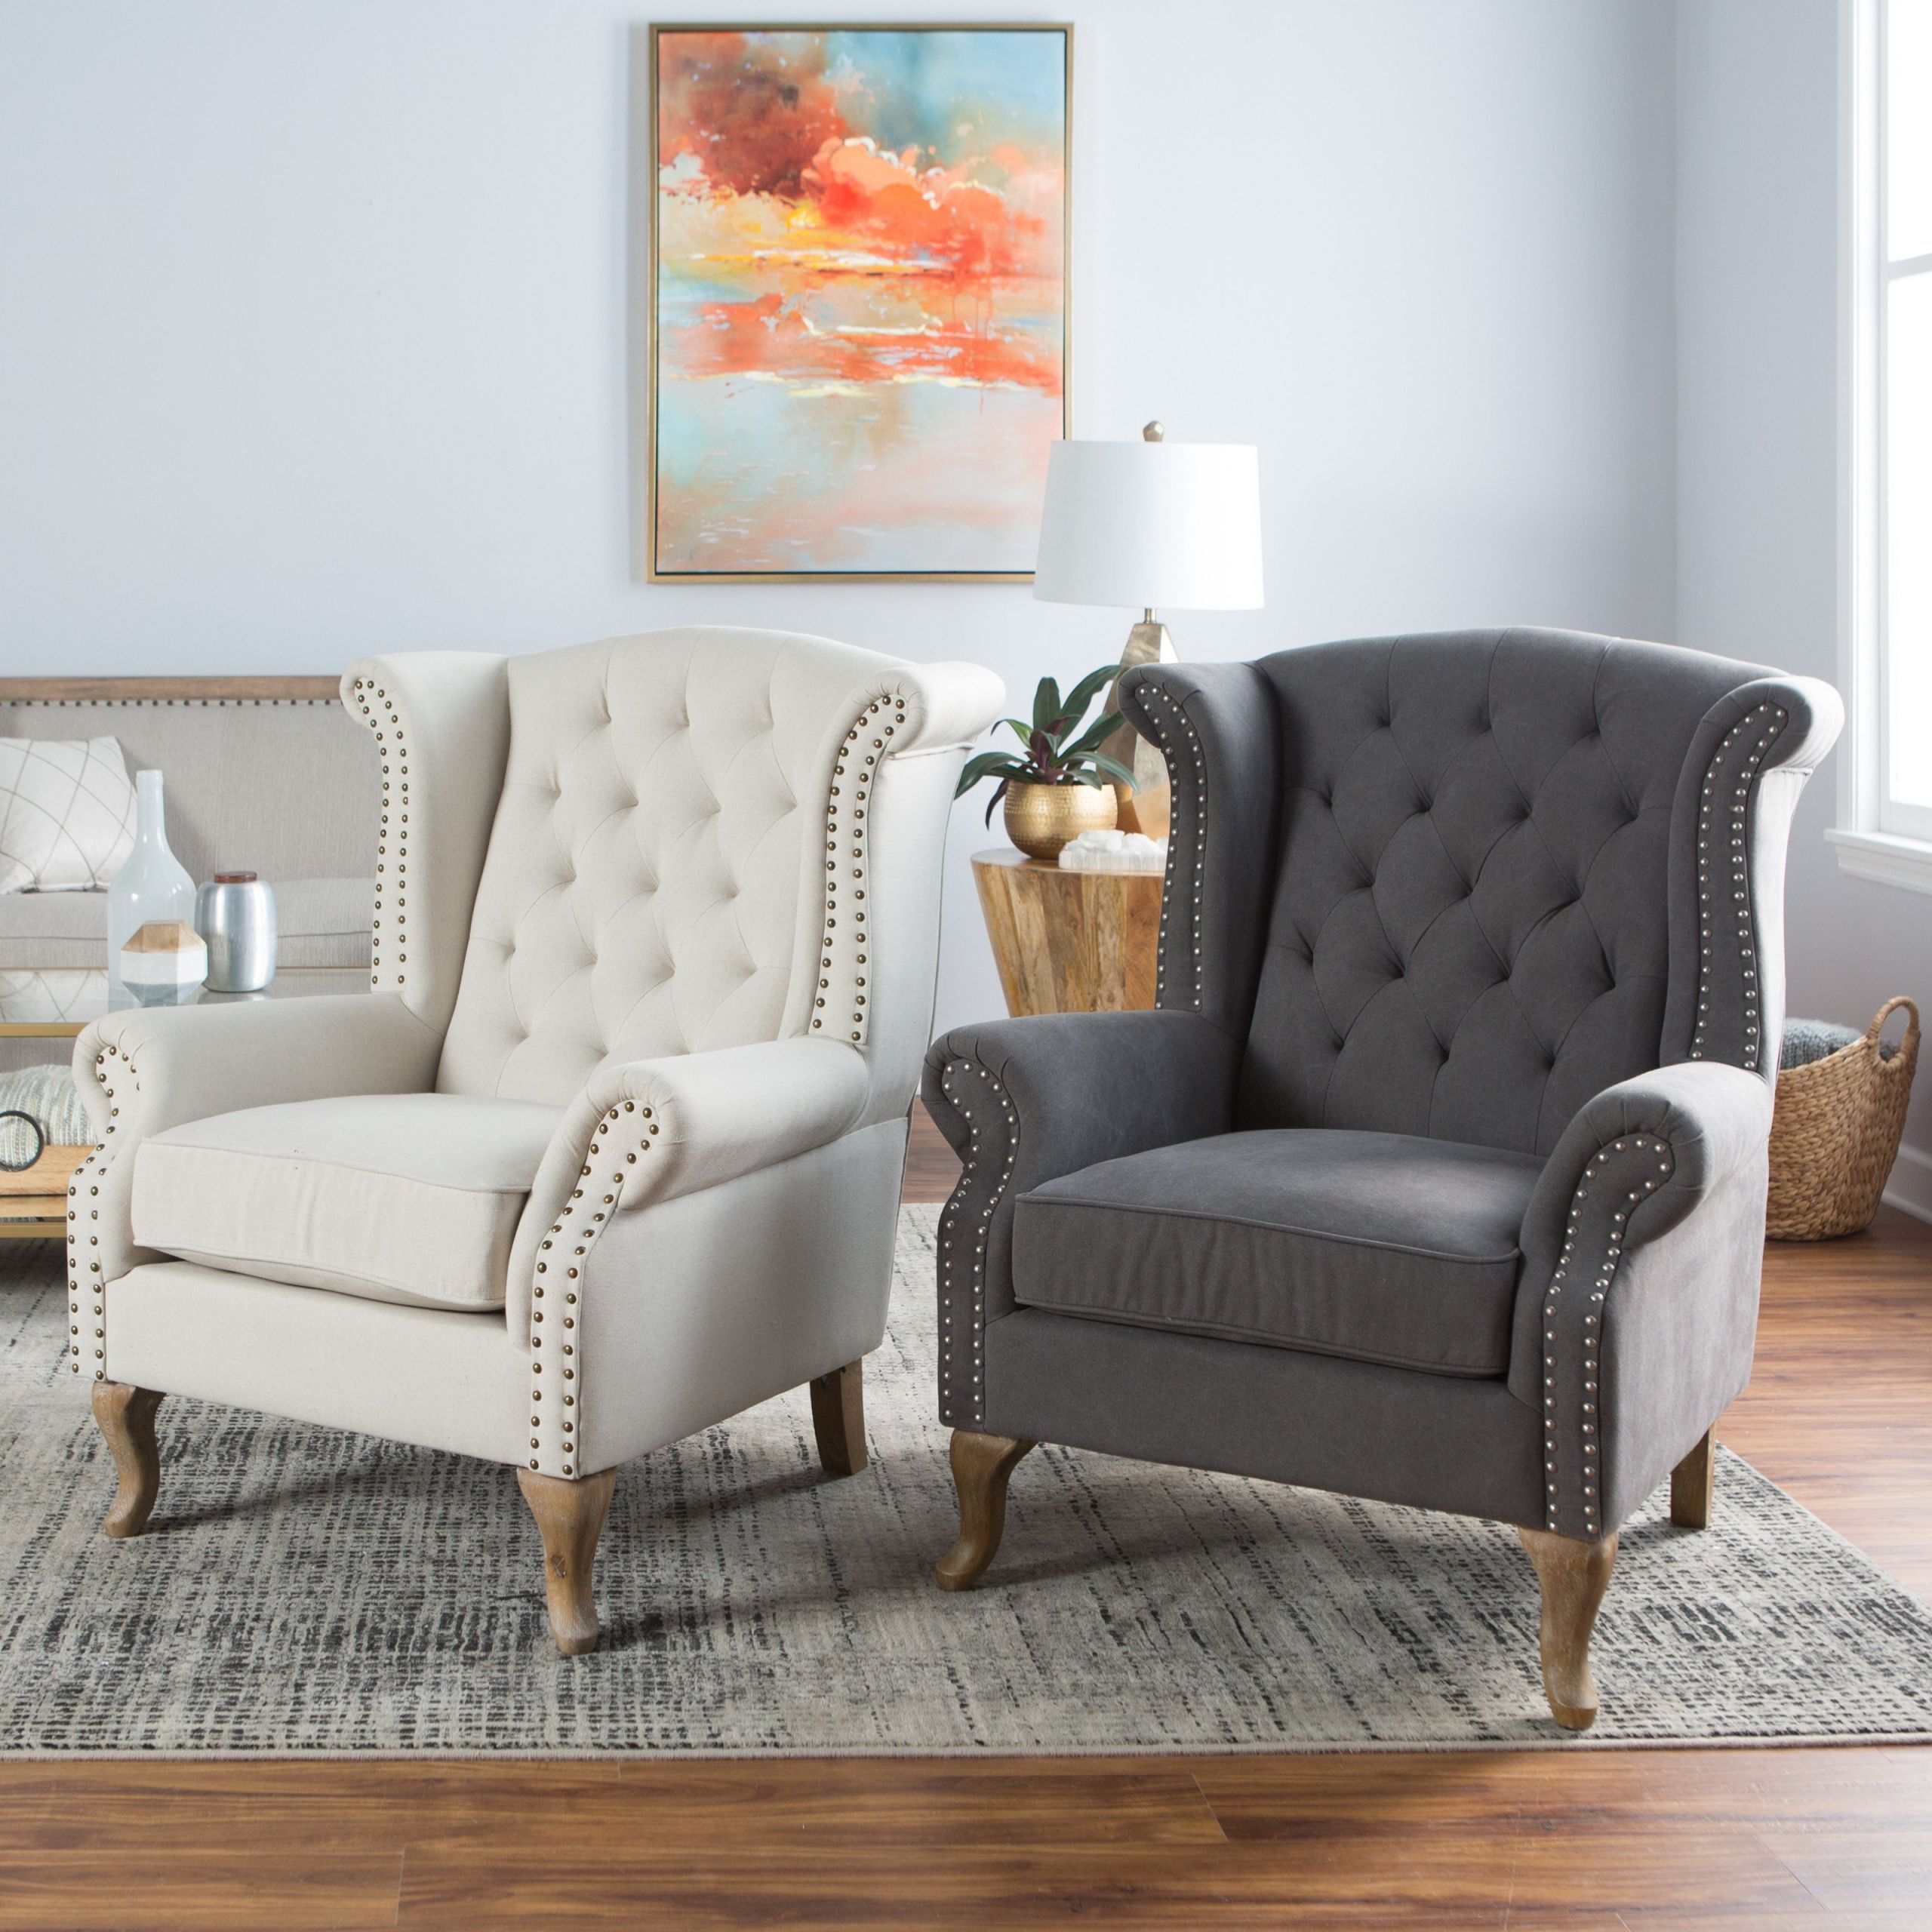 Occasional Chairs for Living Room Awesome 5 Designs Accent Chairs for Your Living Room Fif Blog